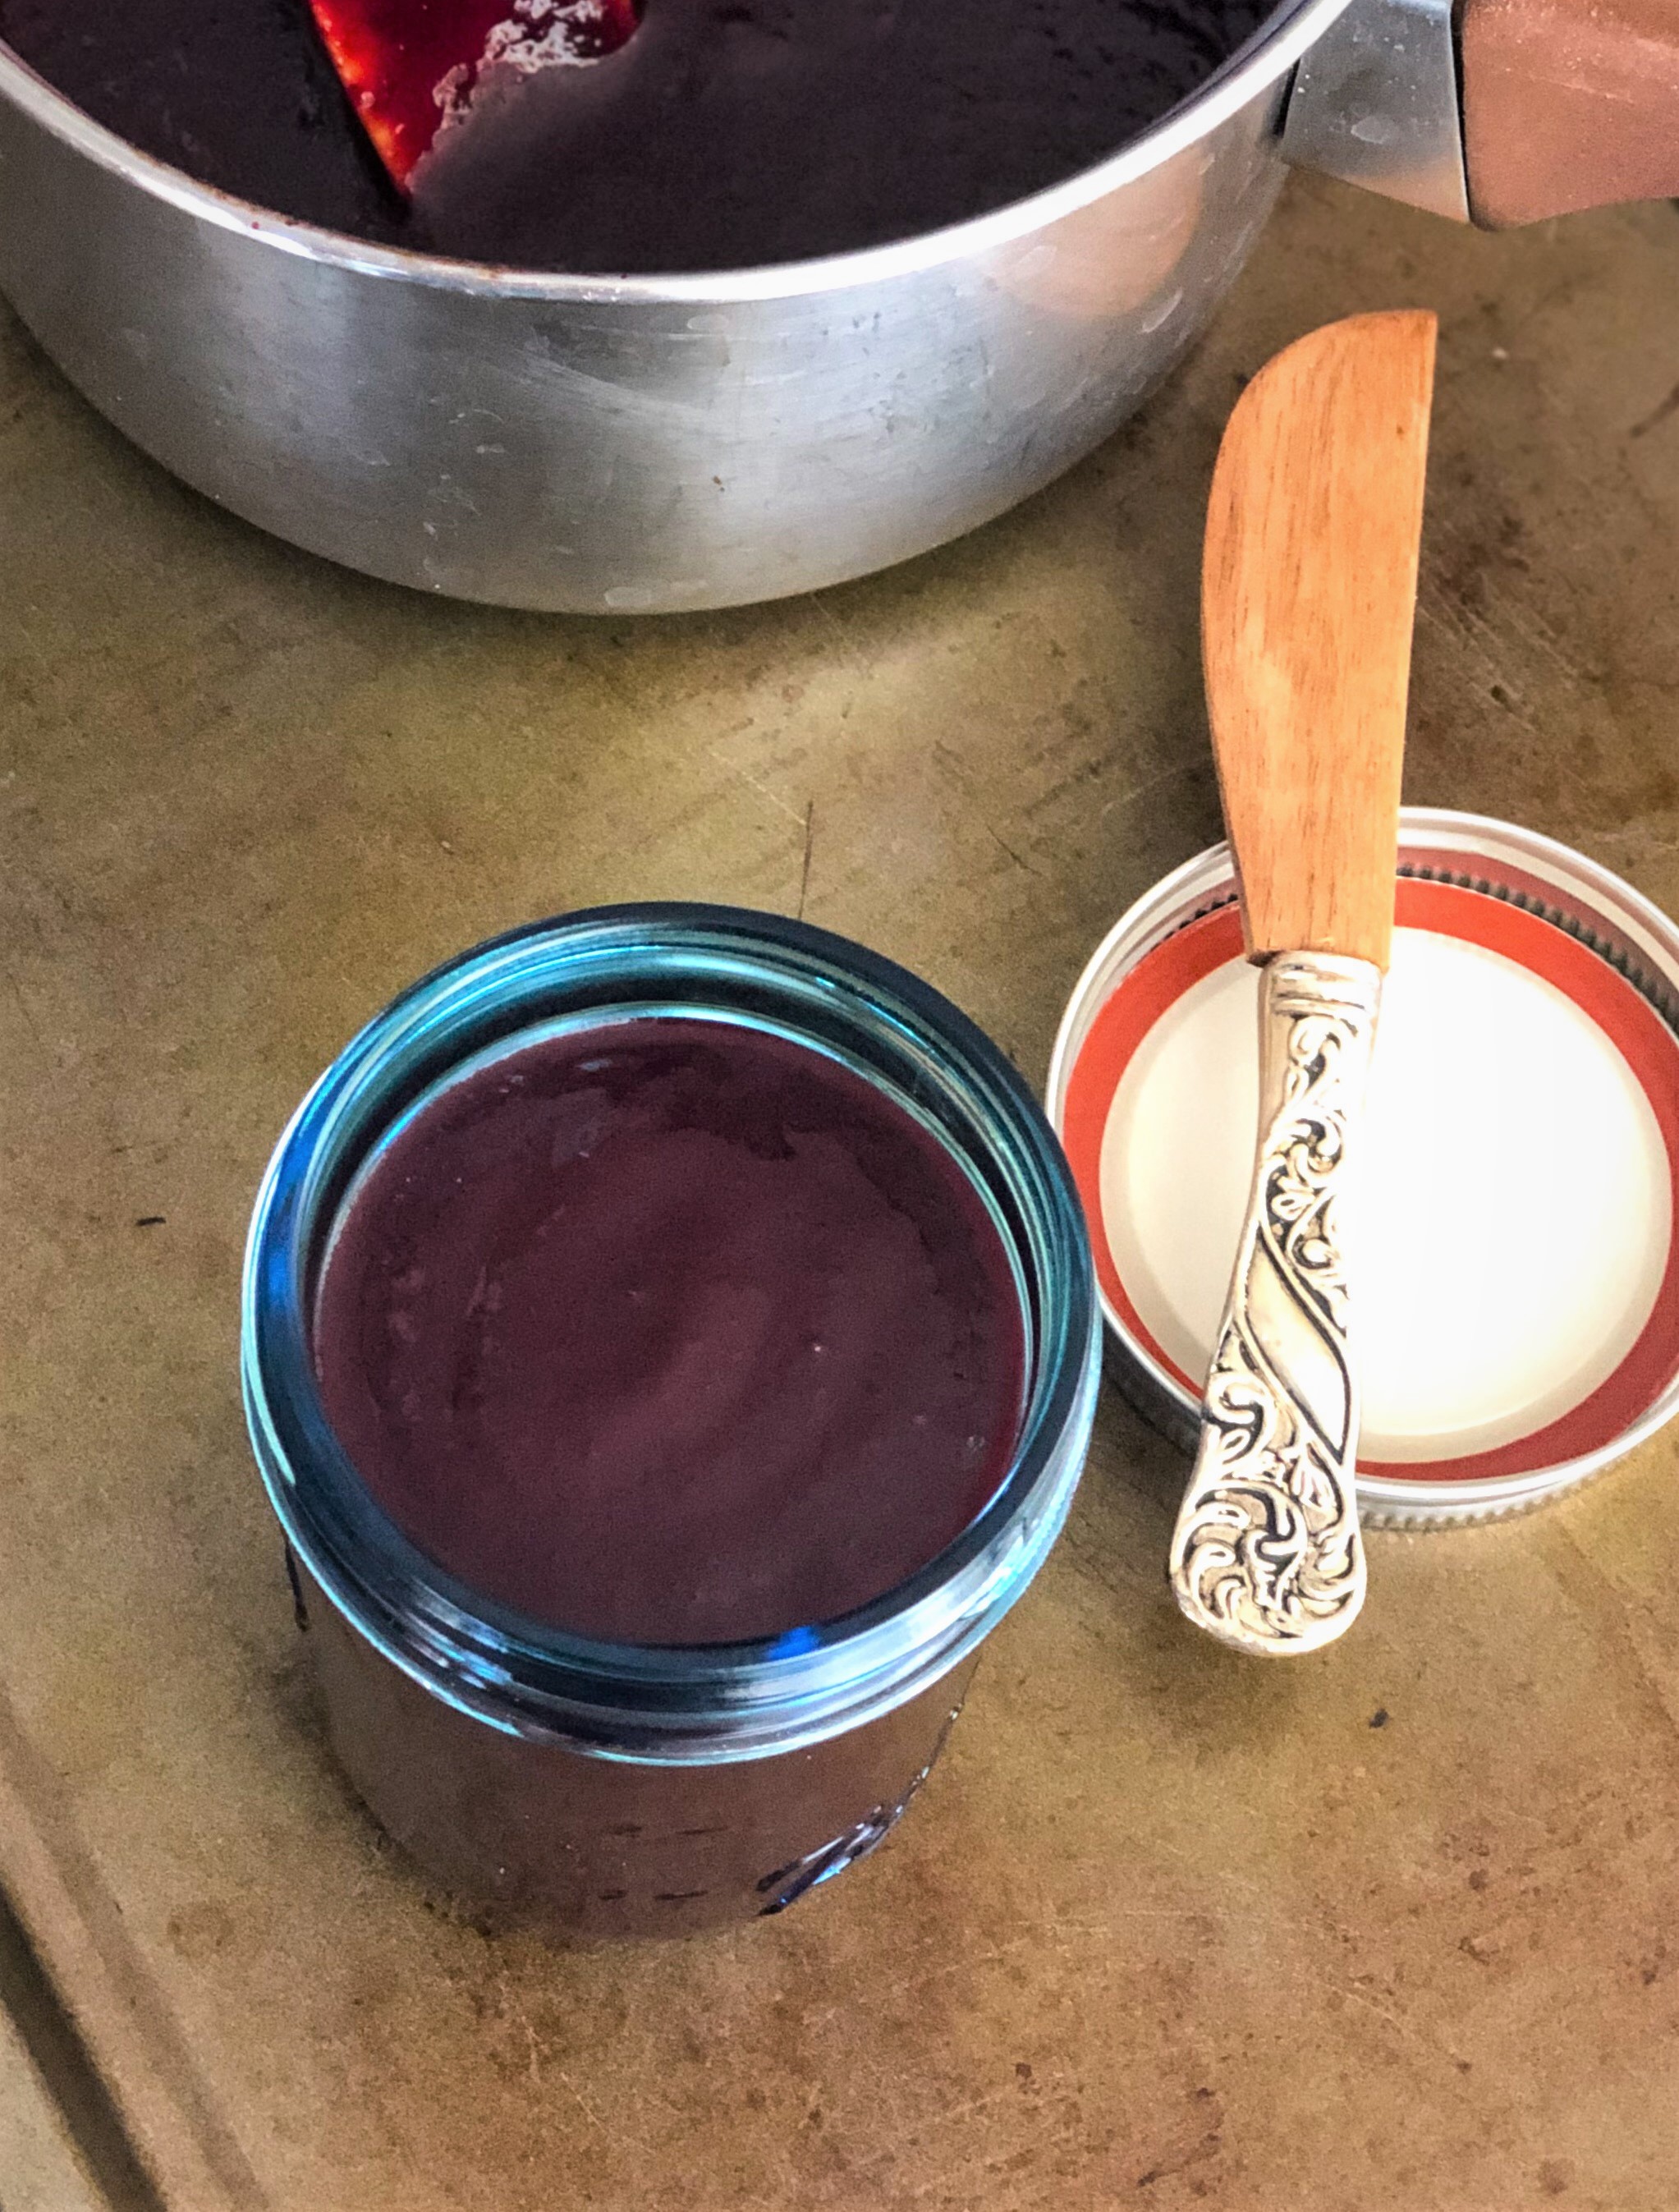 Easy Seedless Blackberry Jam made without pectin. A smooth jam that you can spread on toast, eat with crackers or even drizzle as a sauce on pancakes, waffles or ice cream.